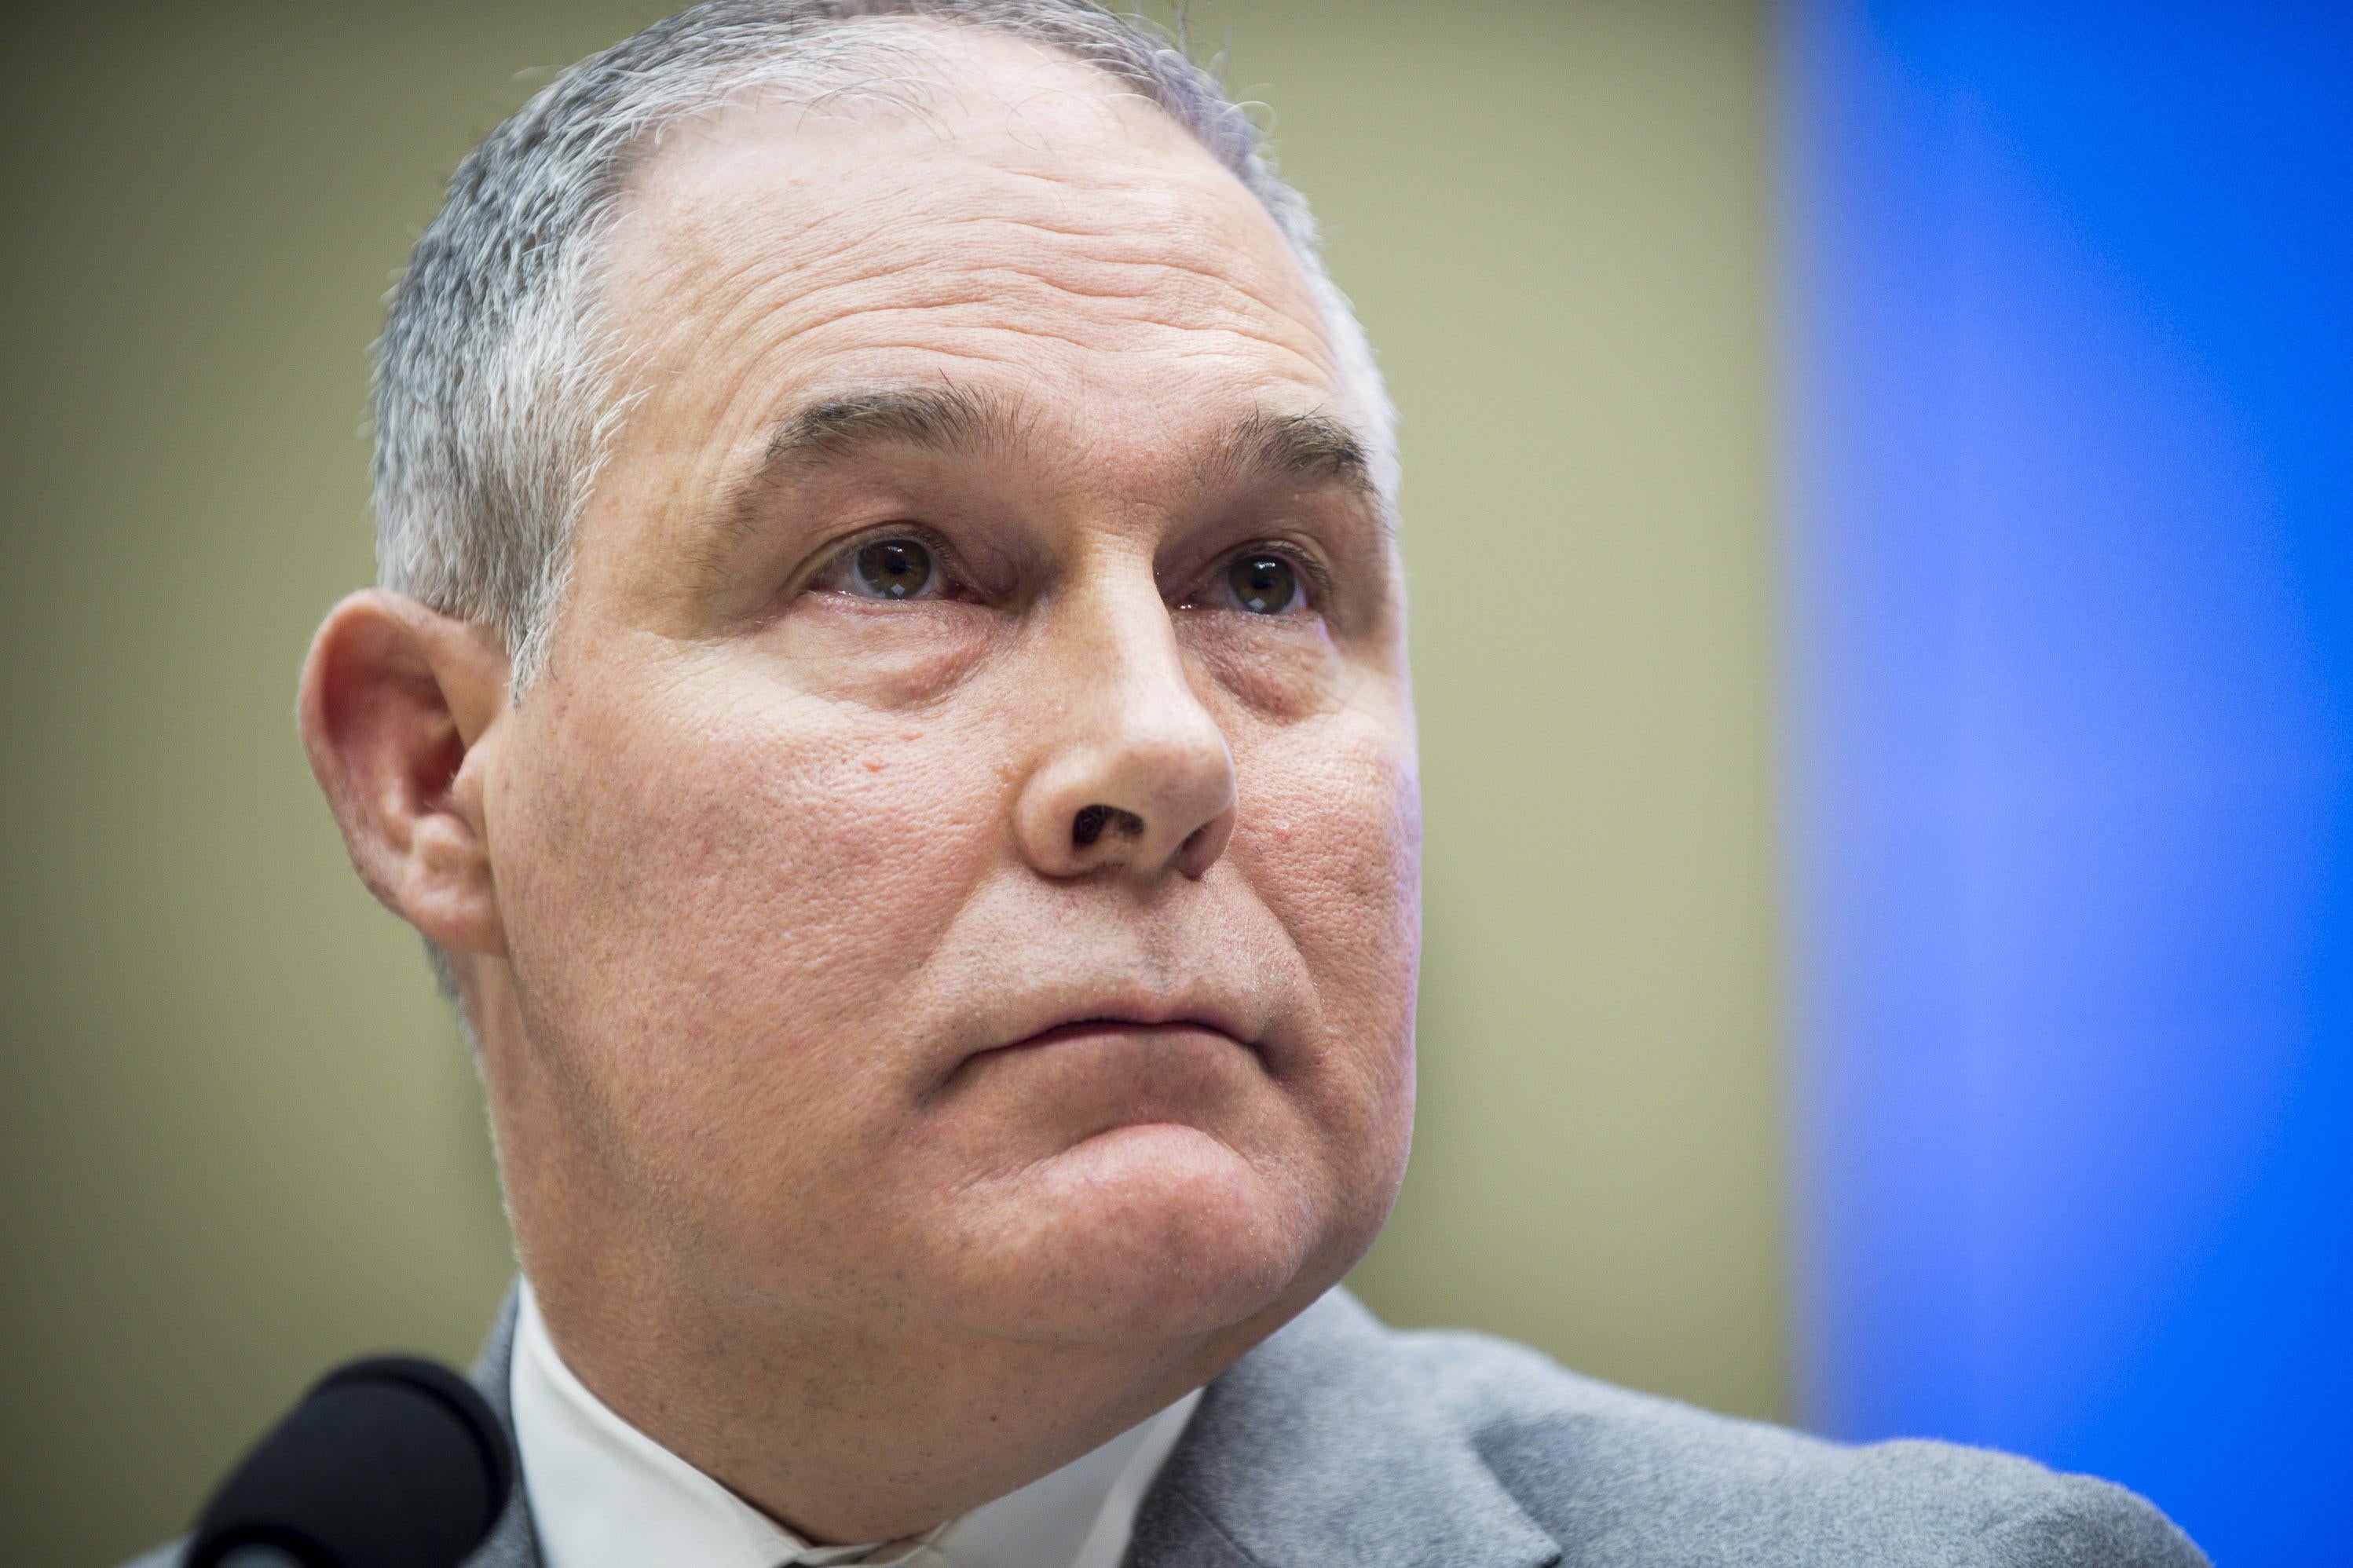 A close shot of Environmental Protection Agency Administrator Scott Pruitt's face as he testifies before a congressional committee.